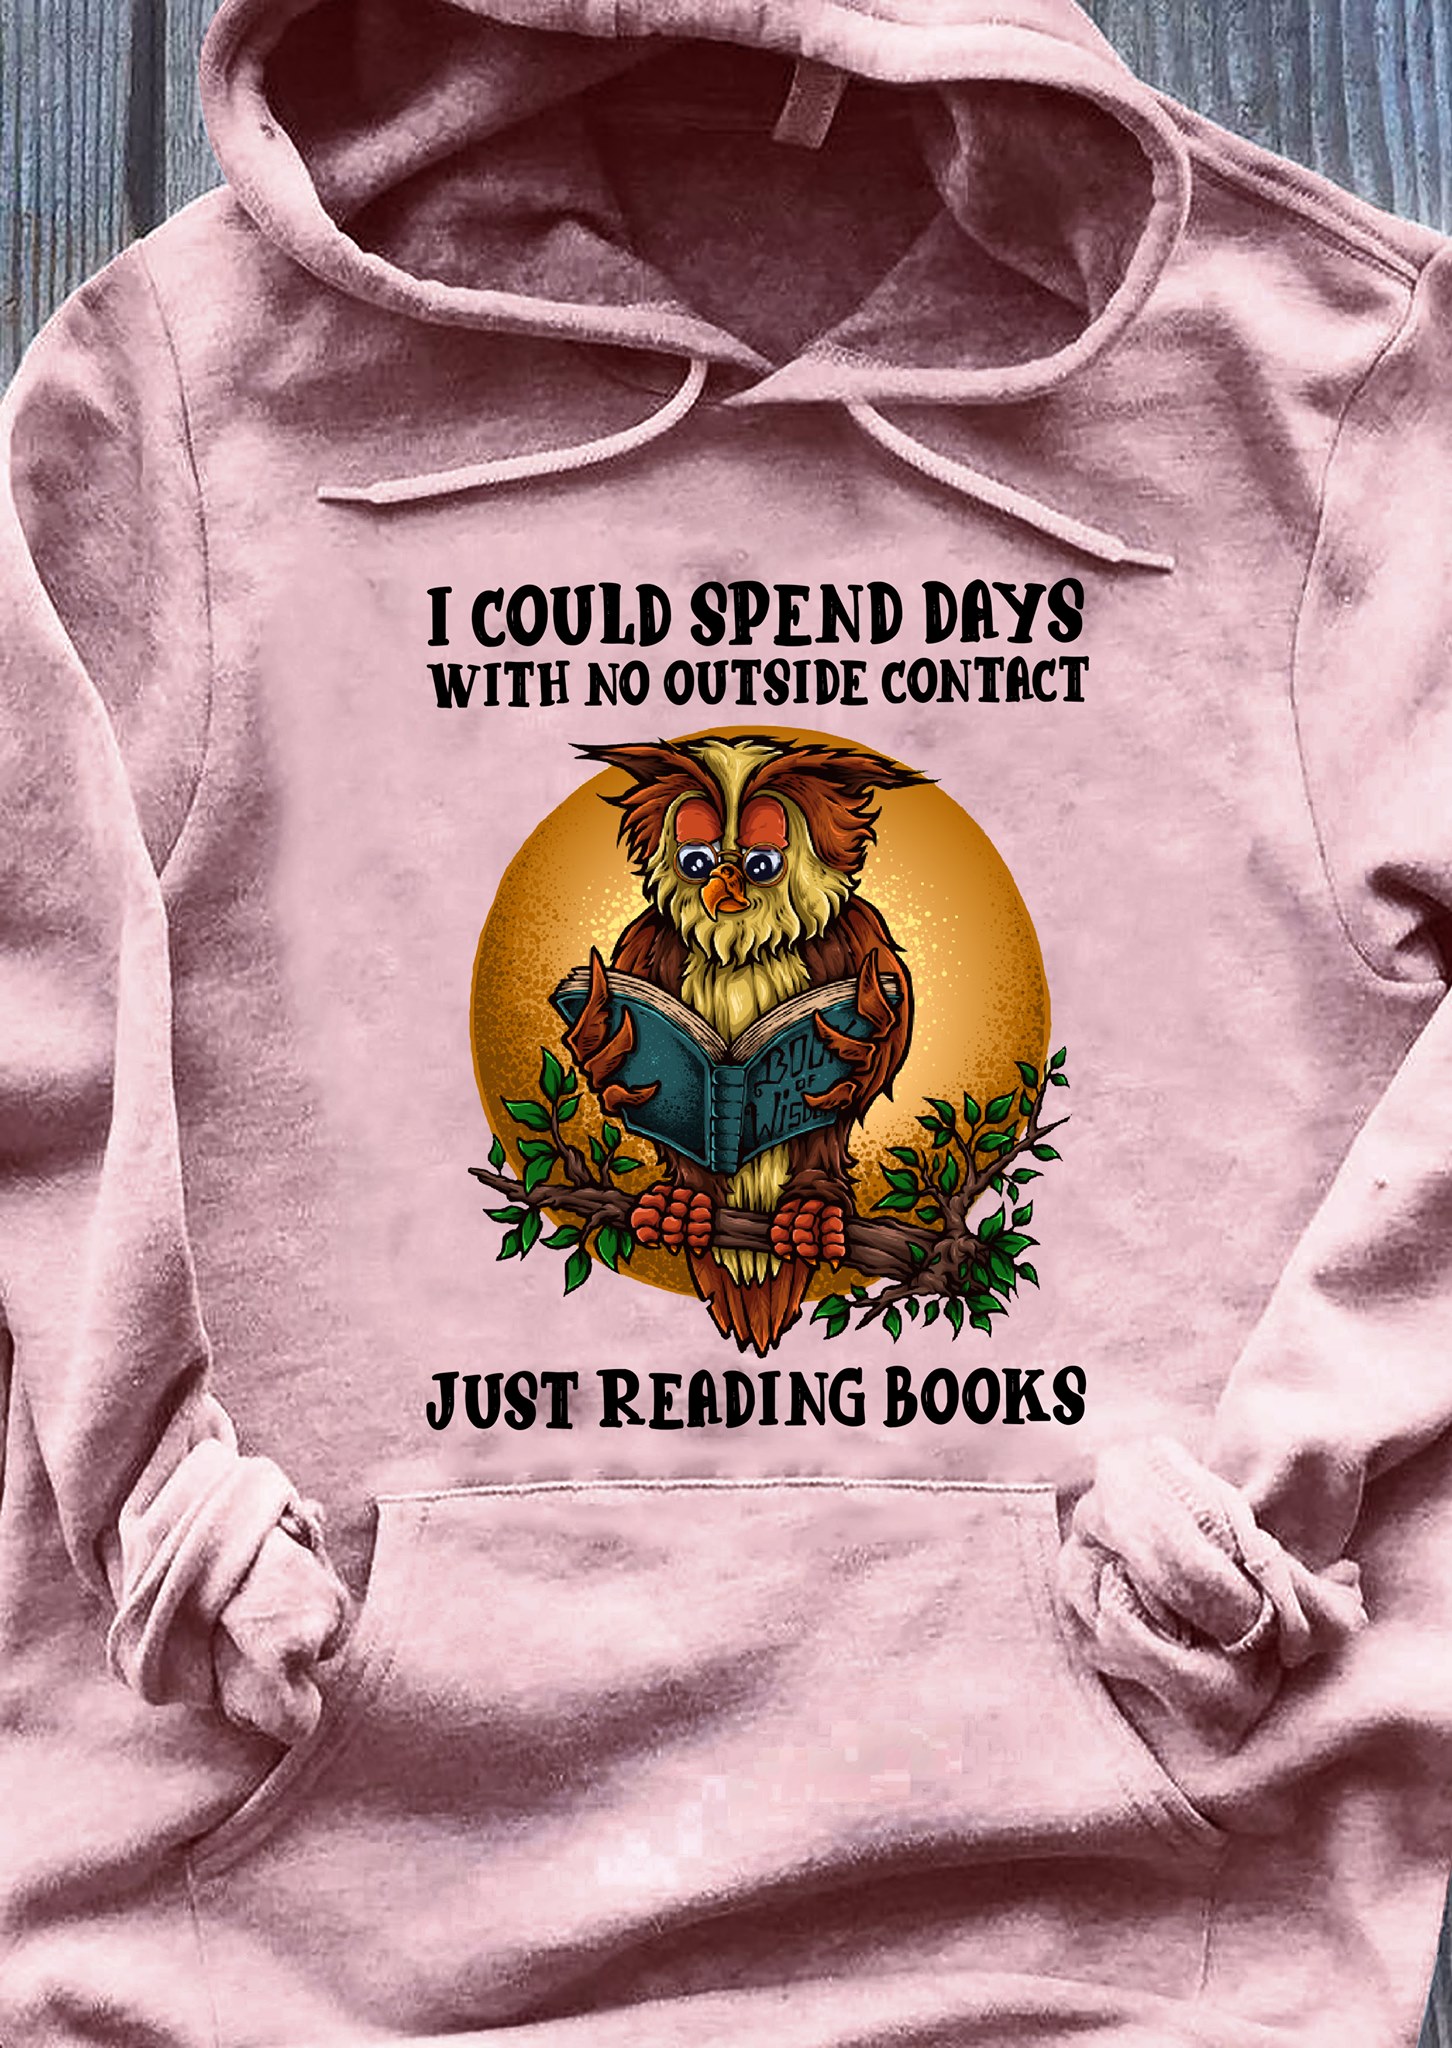 The owl spends days to reading books